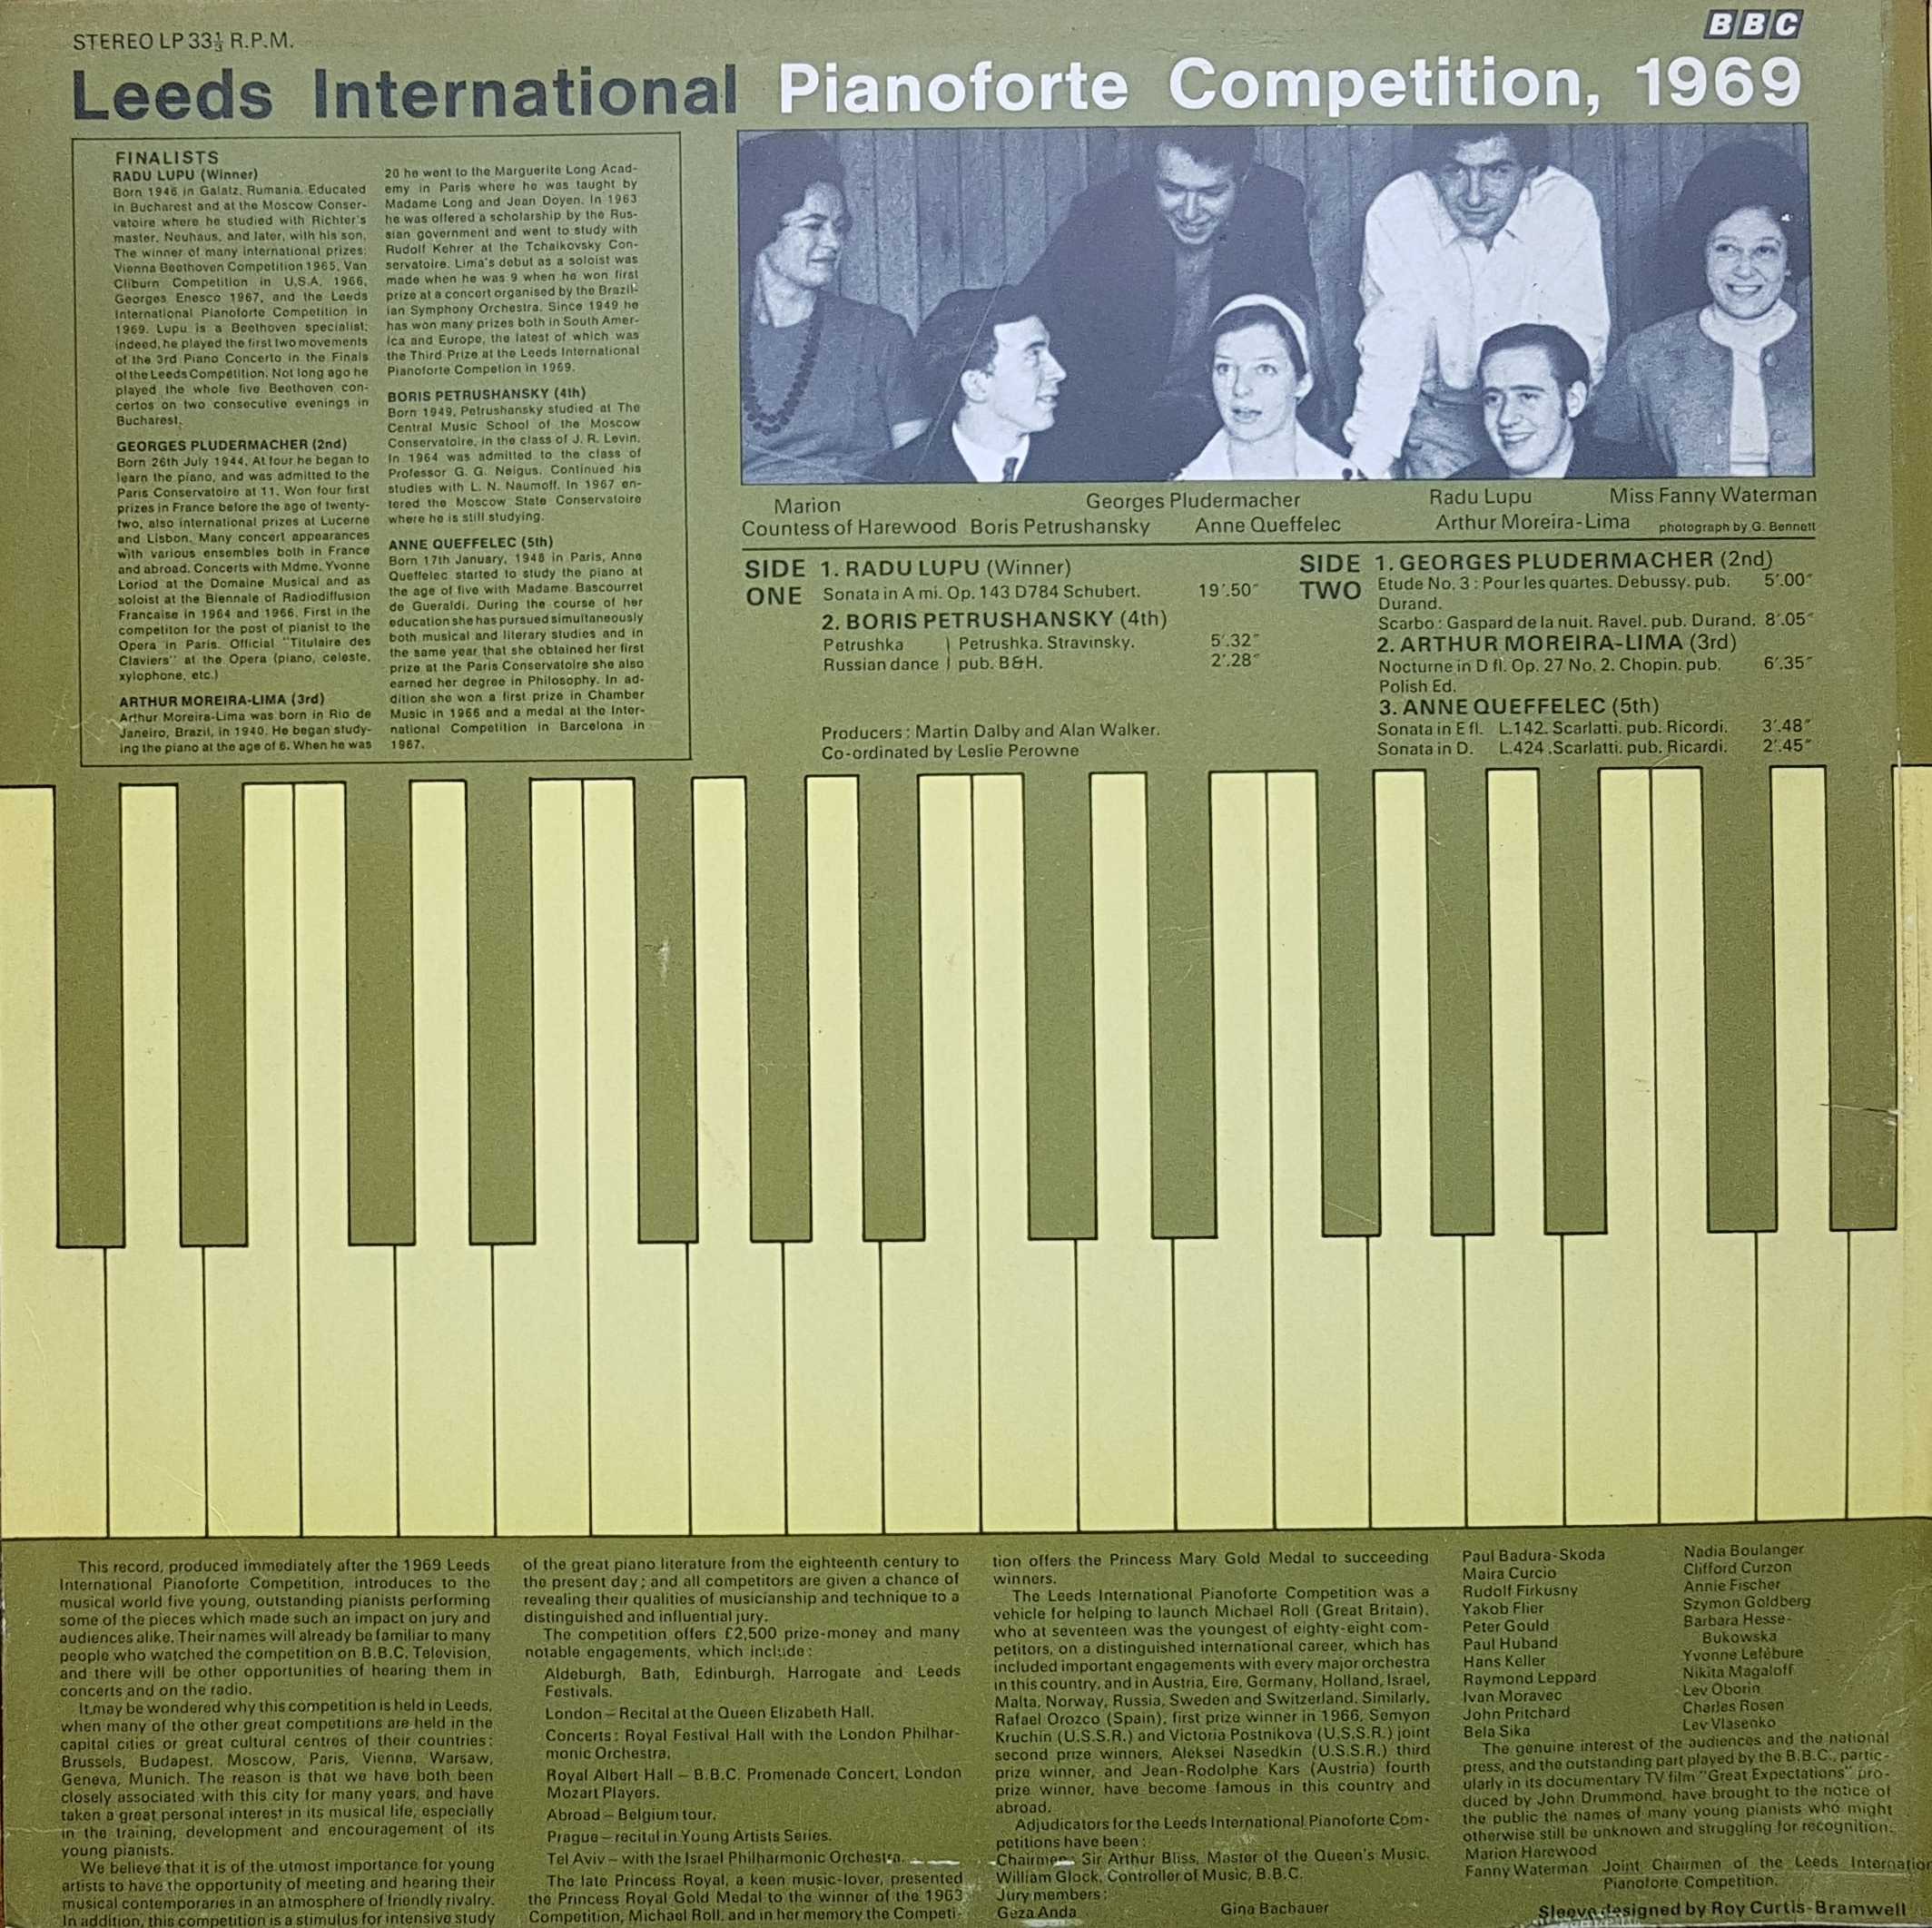 Picture of REB 57 Leeds international pianoforte competition by artist Various from the BBC records and Tapes library